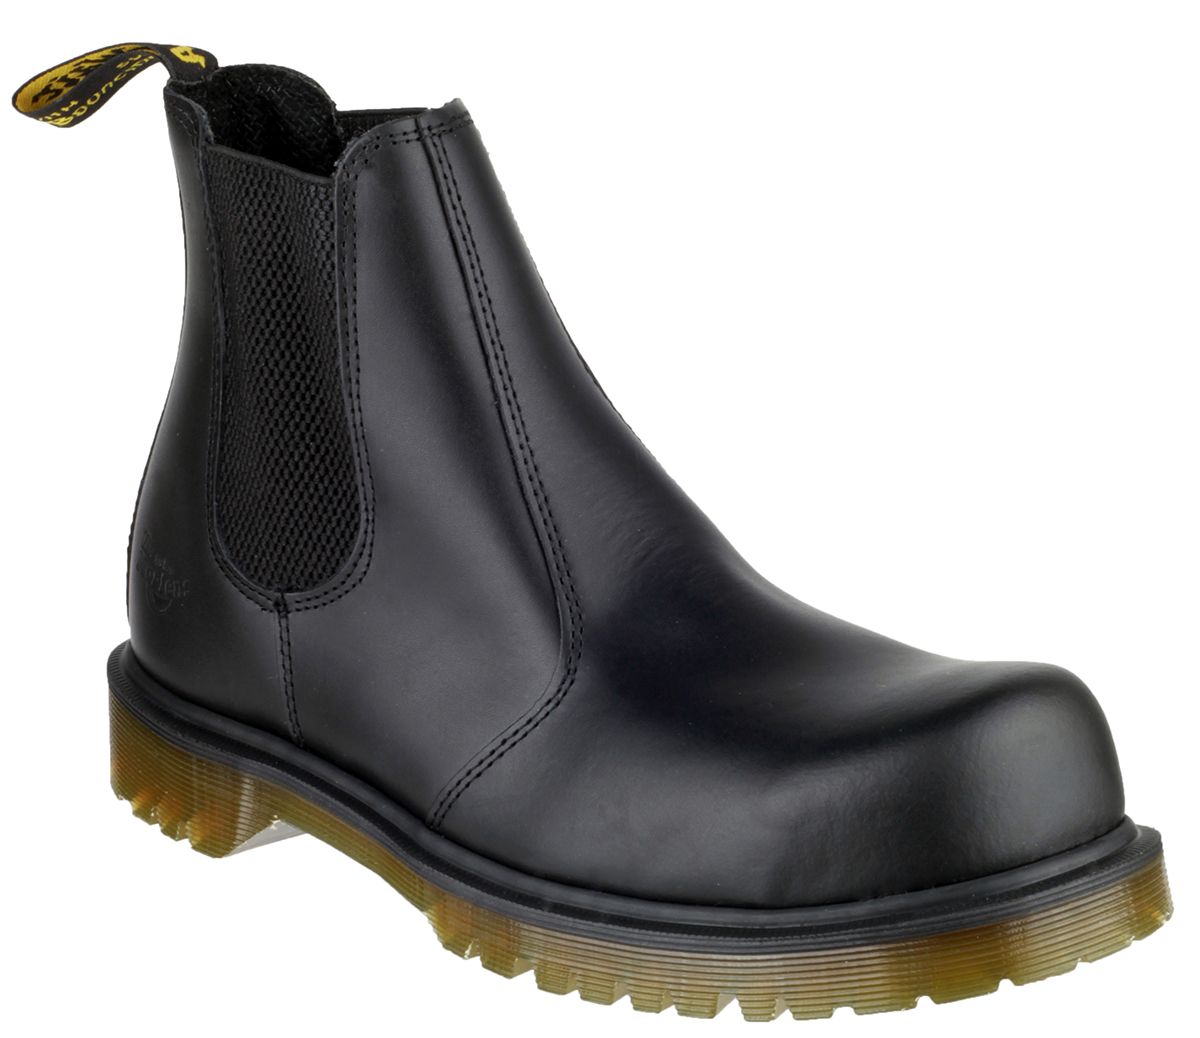 Dr Martens Icon 2228 Black Steel Toe Capped Mens Safety Boots, UK 8, EU 42